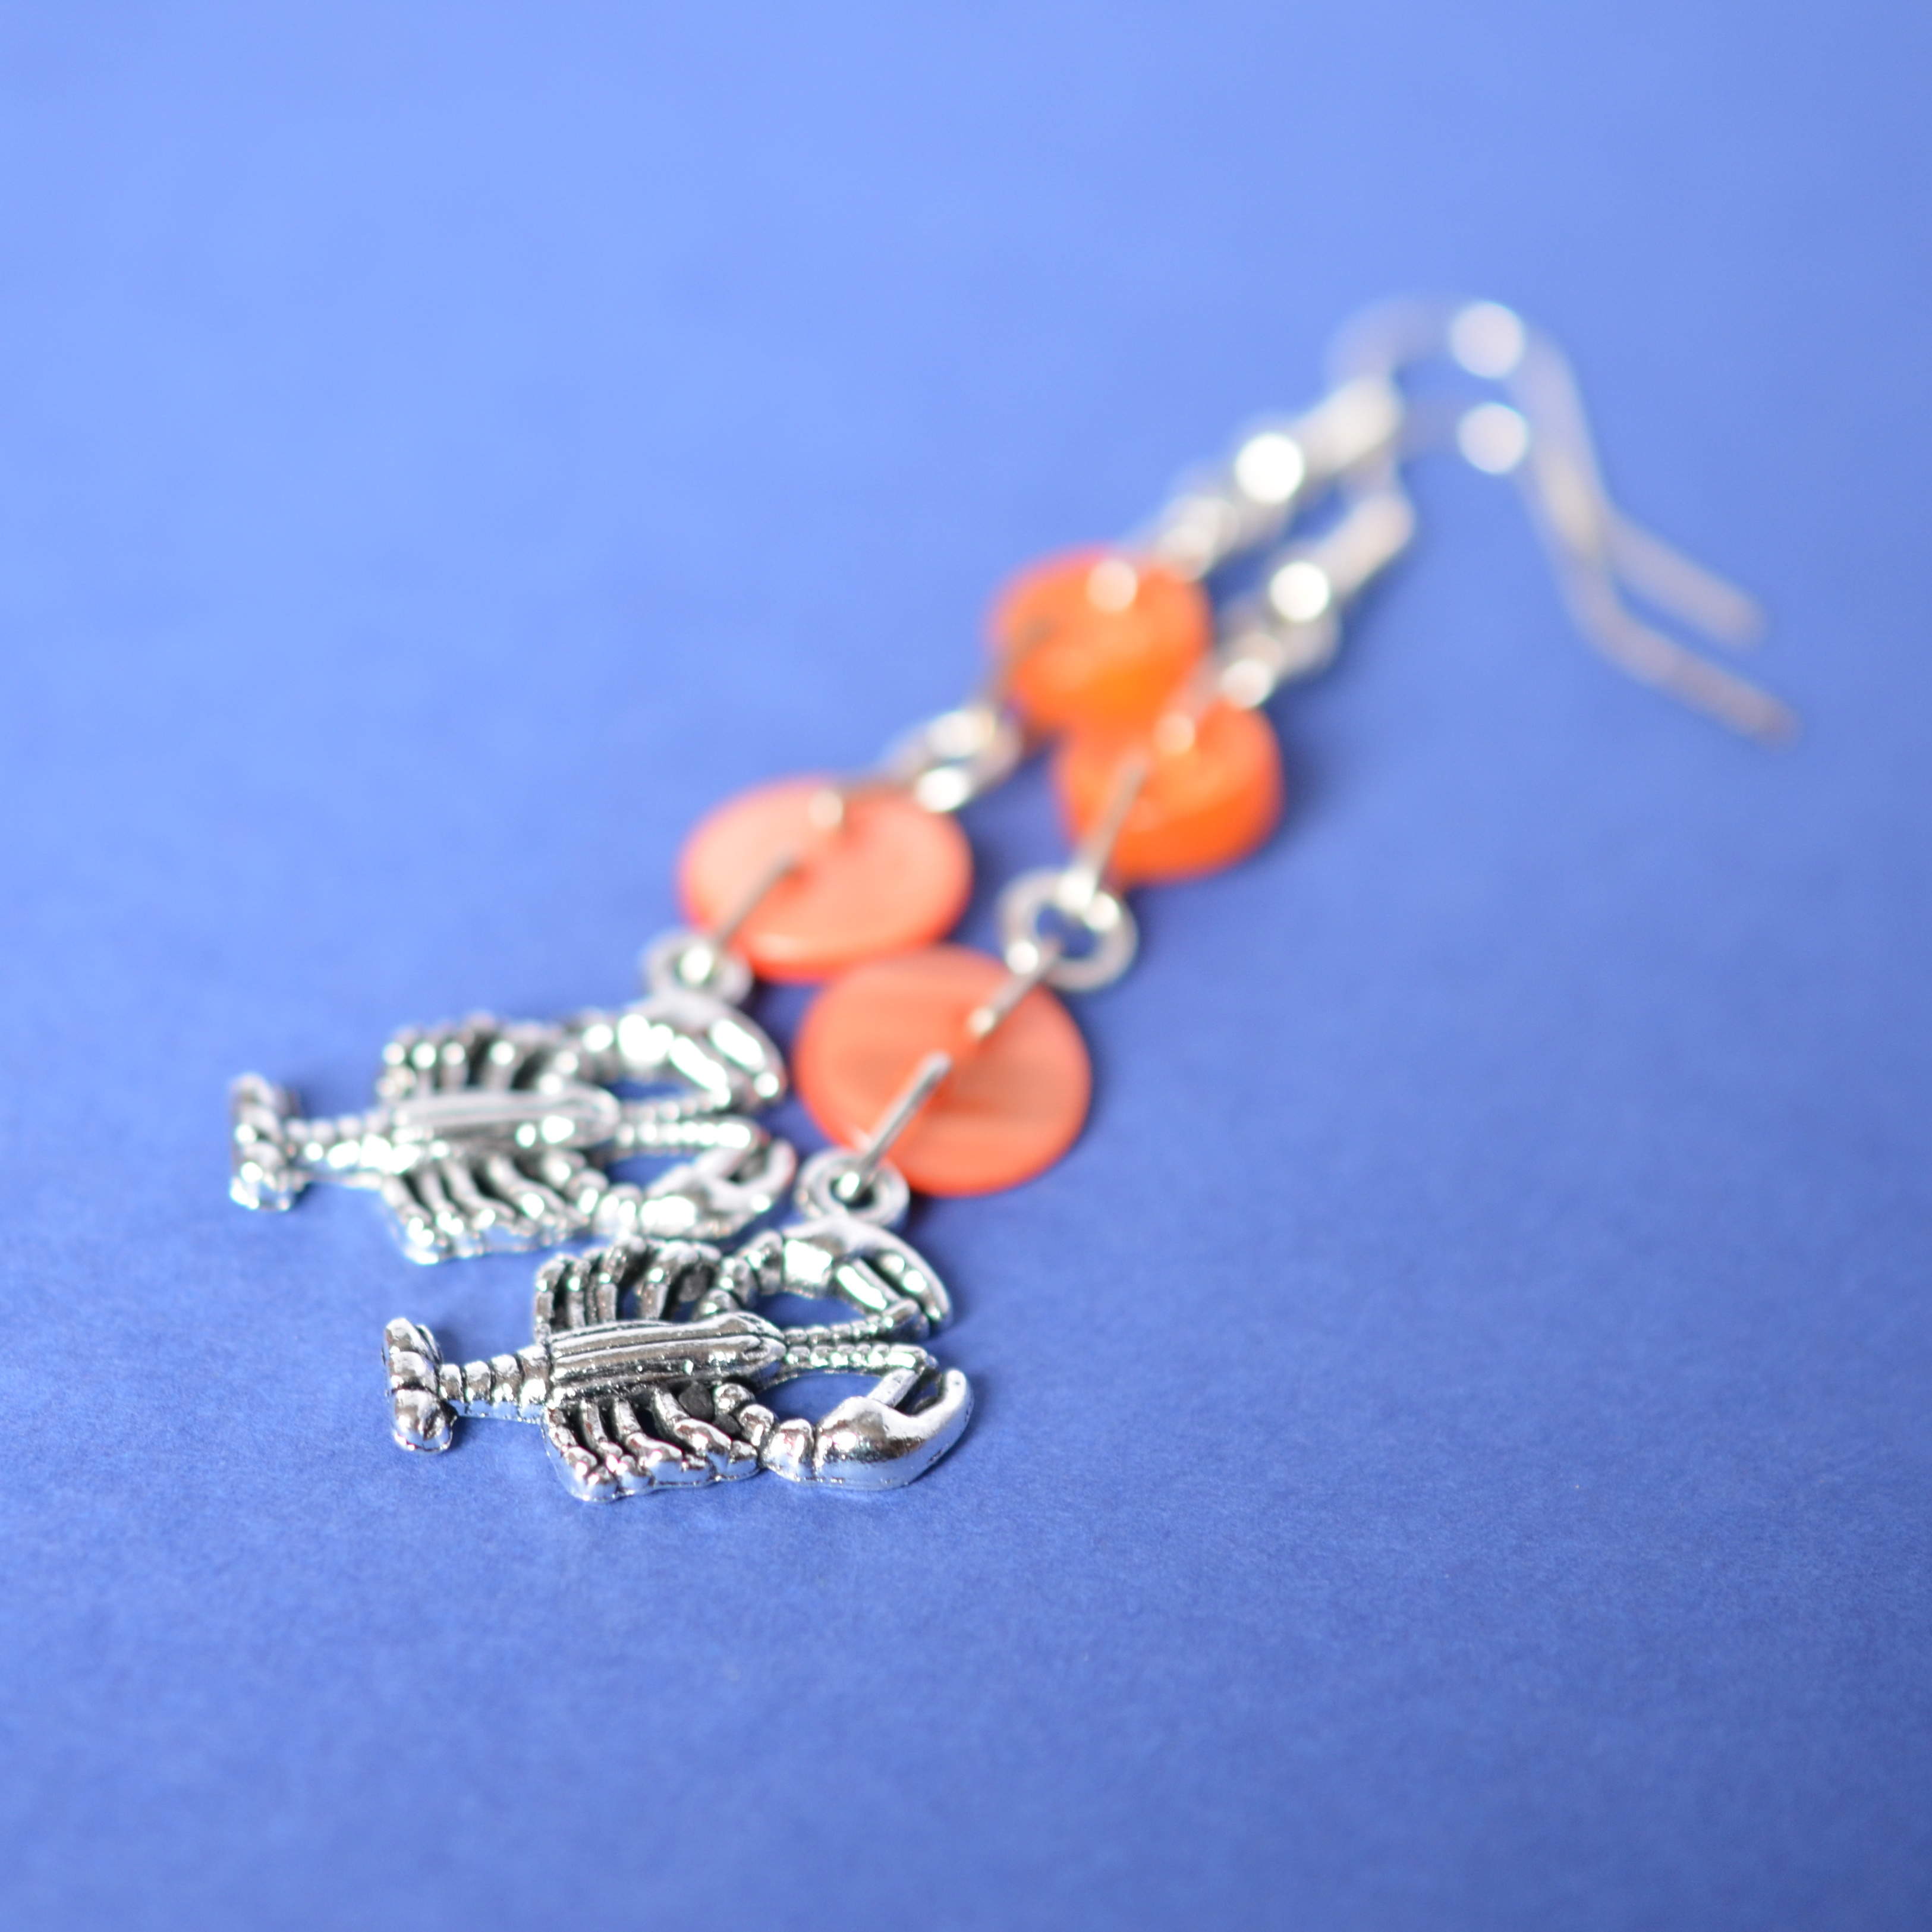 Lobster Two Button Charm Earrings